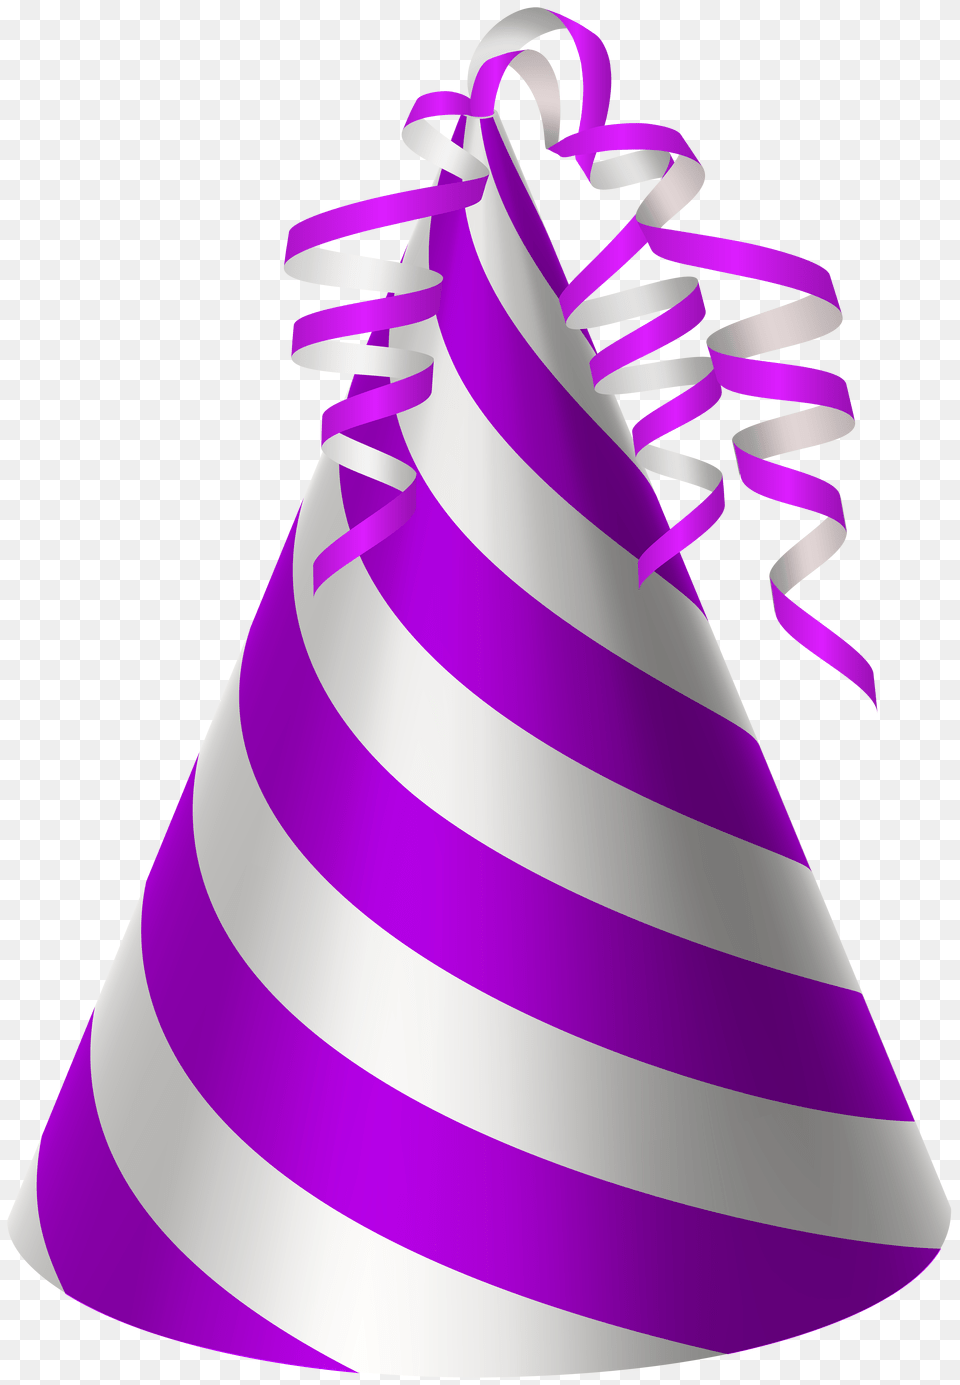 Birthday Hat Purple Superb Pictures Me 2020 Transparent Background Party Hat, Clothing, Party Hat, Dynamite, Weapon Png